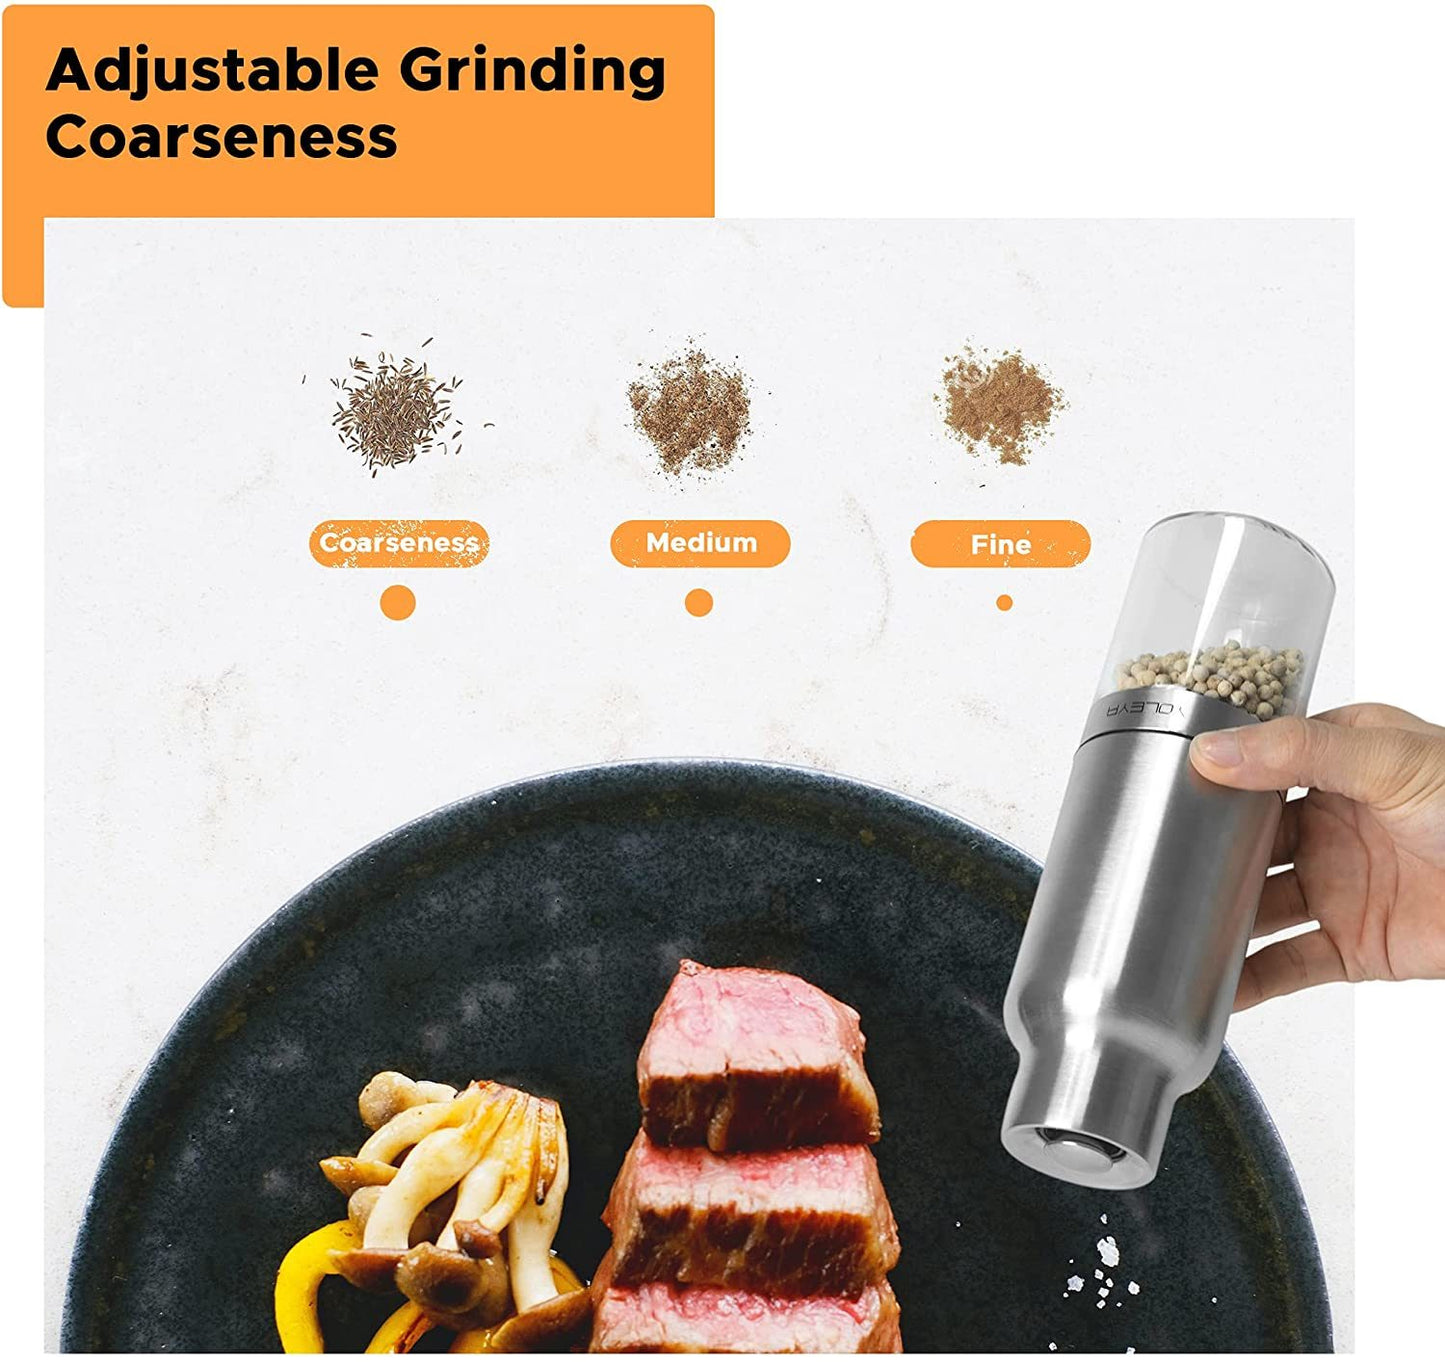 Gravity Electric Salt and Pepper Grinder Set - Automatic Pepper or Salt Mill Shaker, Spice Grinder Battery-Operated with Adjustable Coarseness,One Hand Operated,Utility Brush,Premium Stainless Steel